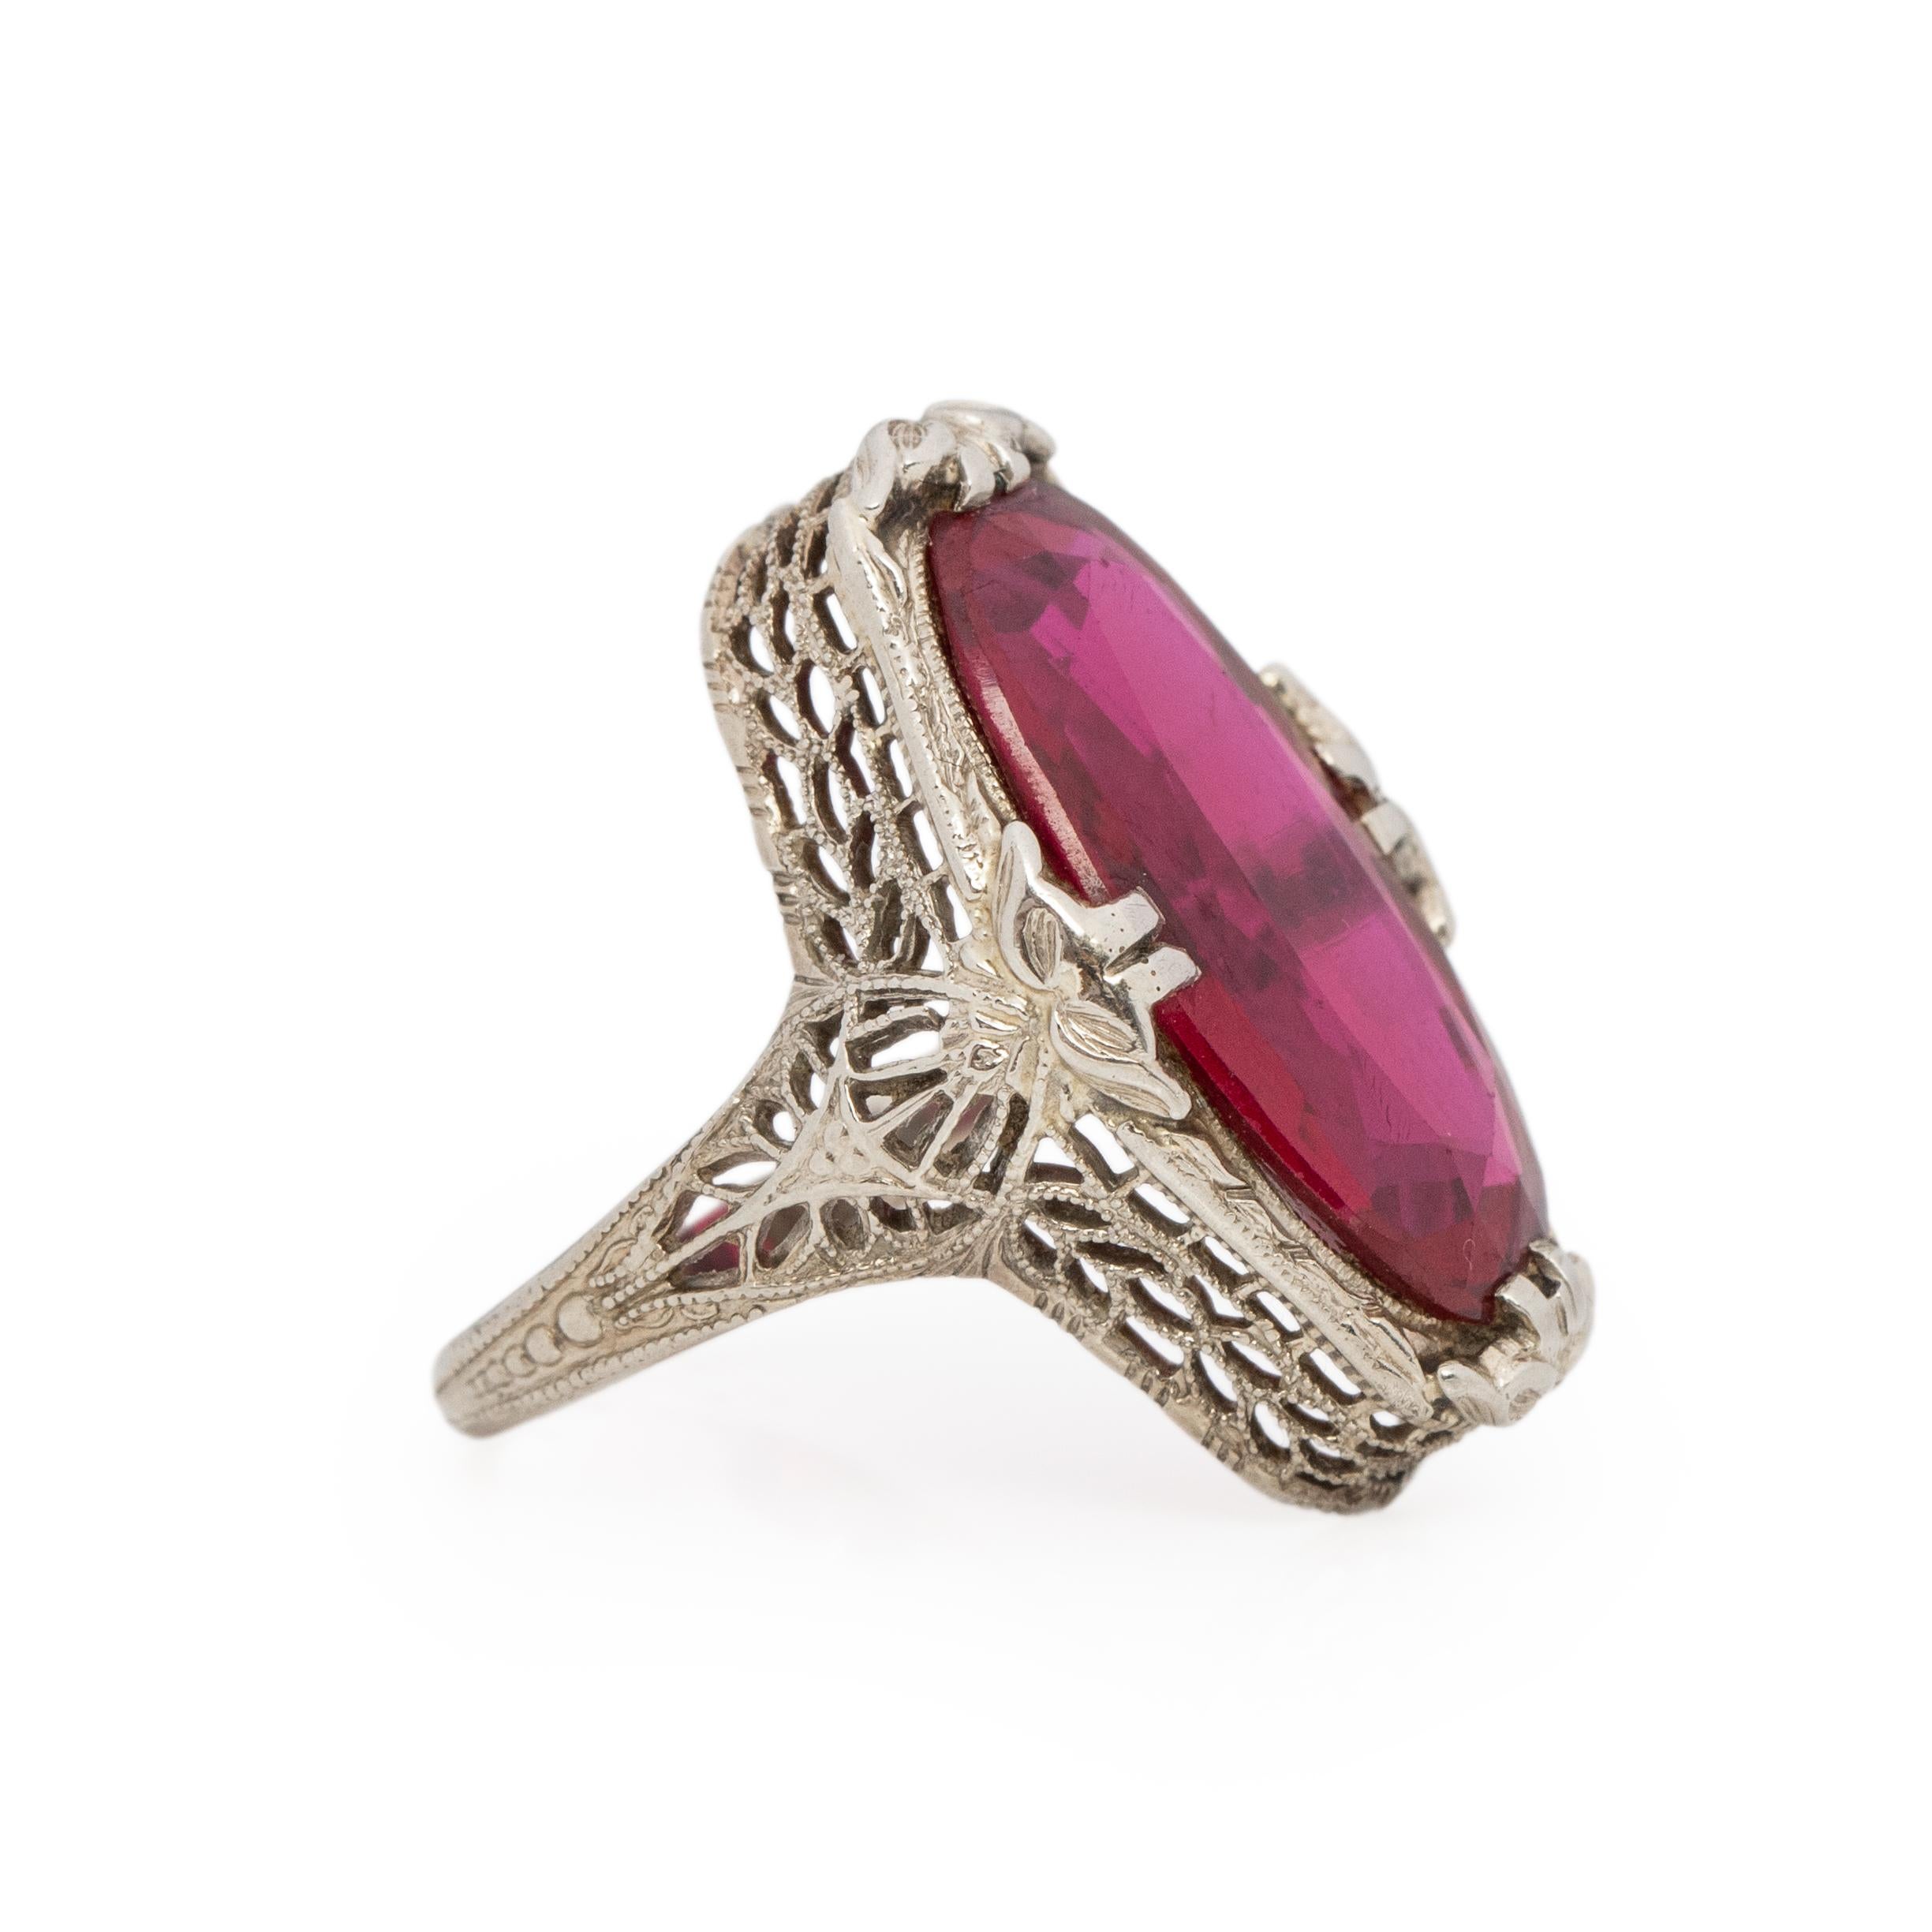 This art deco beauty, has breathtaking filigree work crafted in 14K white gold the flowing floral and geometric patterns holds a vibrant oval brilliant cut glass gem. This glass gem has a beautiful vibrant red hue. The unique long oval shapes, sits